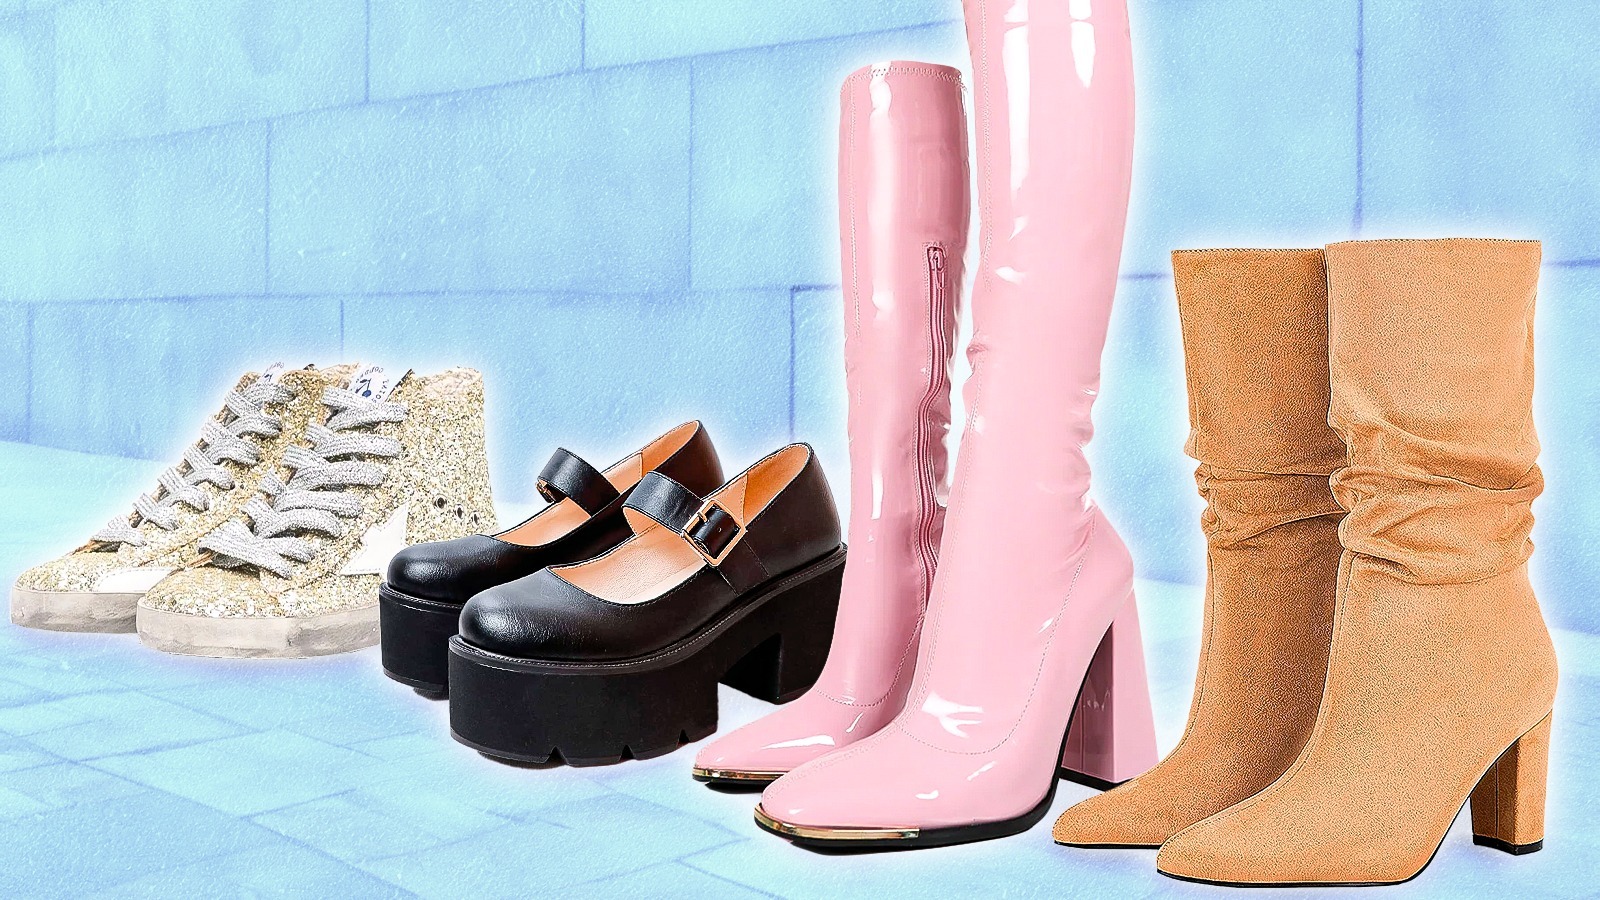 Strut Through 2023 With 20 Of The Best Shoe Trends Of The Year